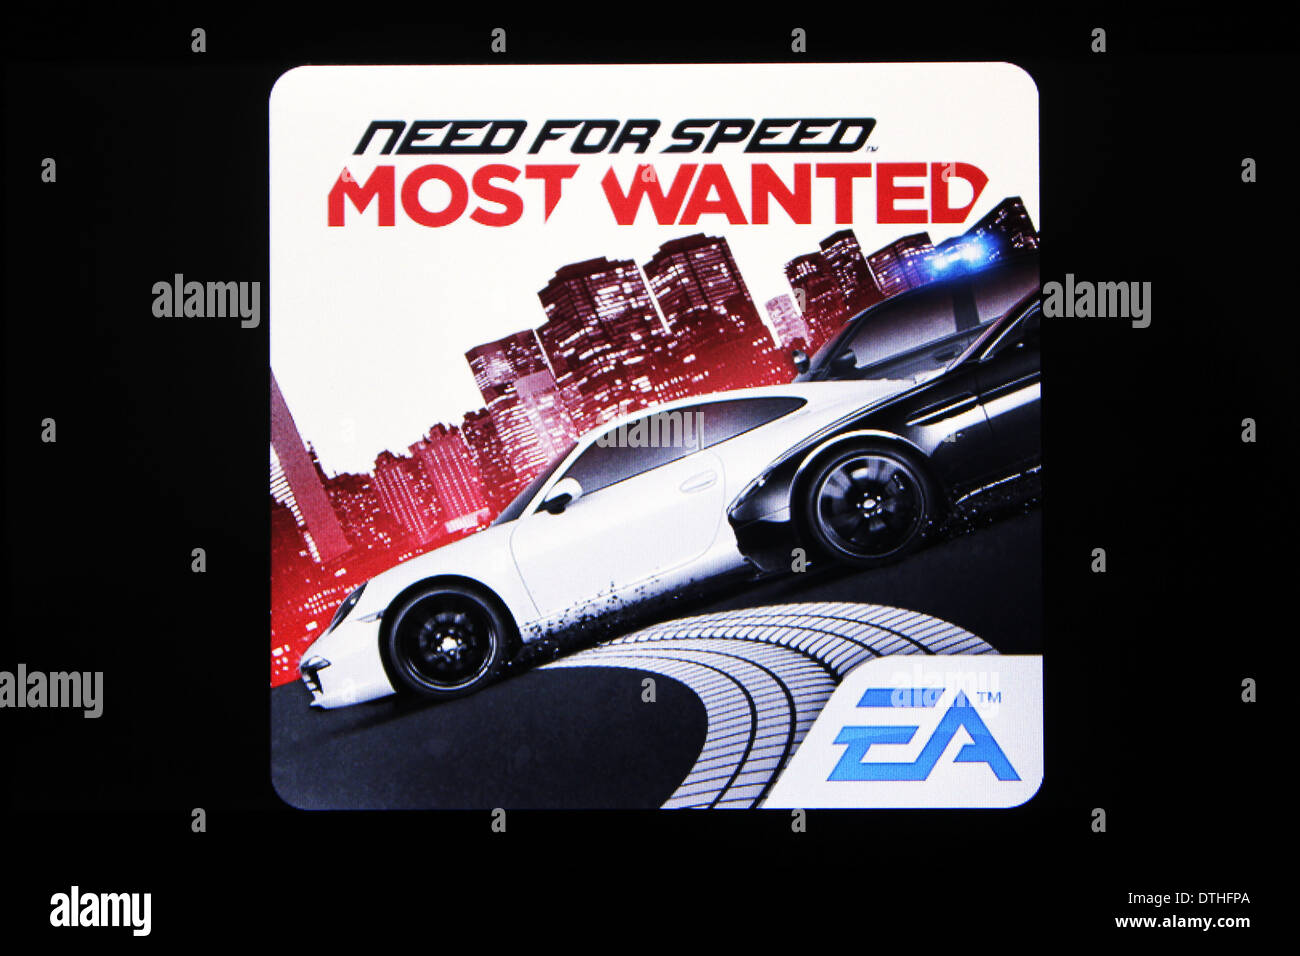 Need for speed most wanted logo EA sports Stock Photo